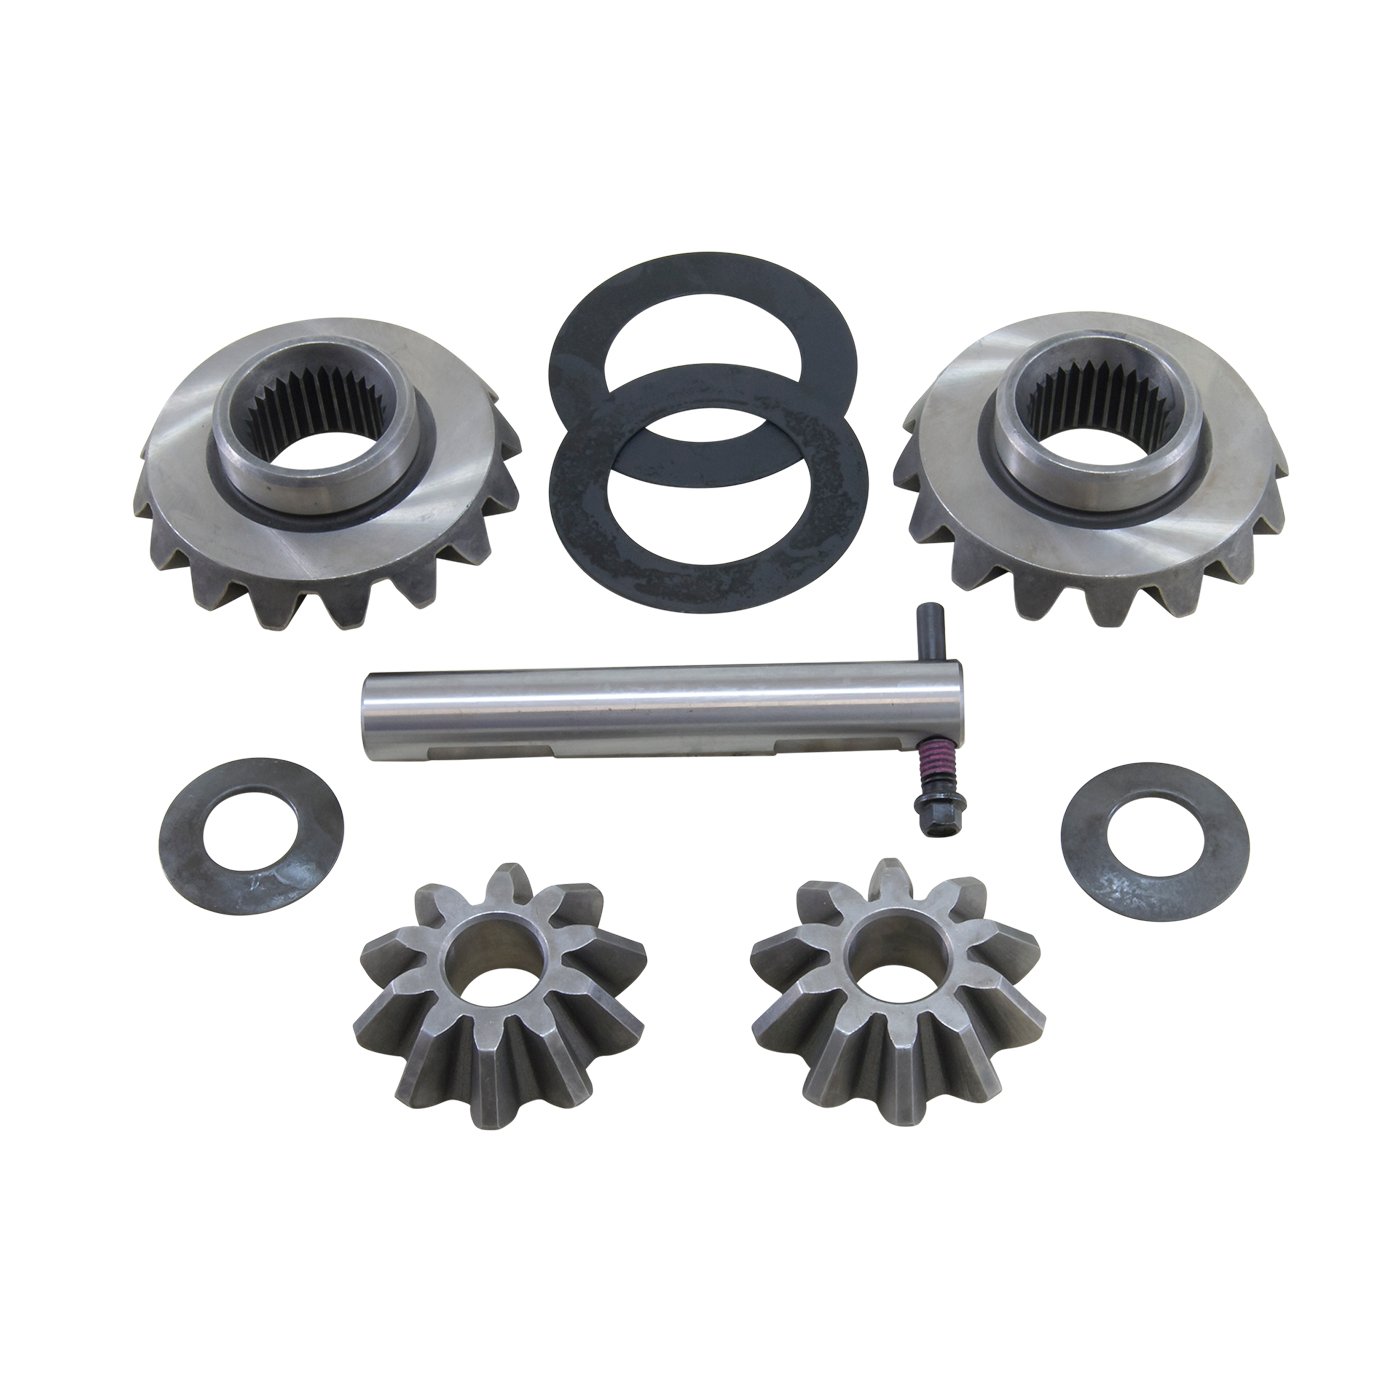 Standard Open Spider Gear Kit Ford 8.8" (and IFS)